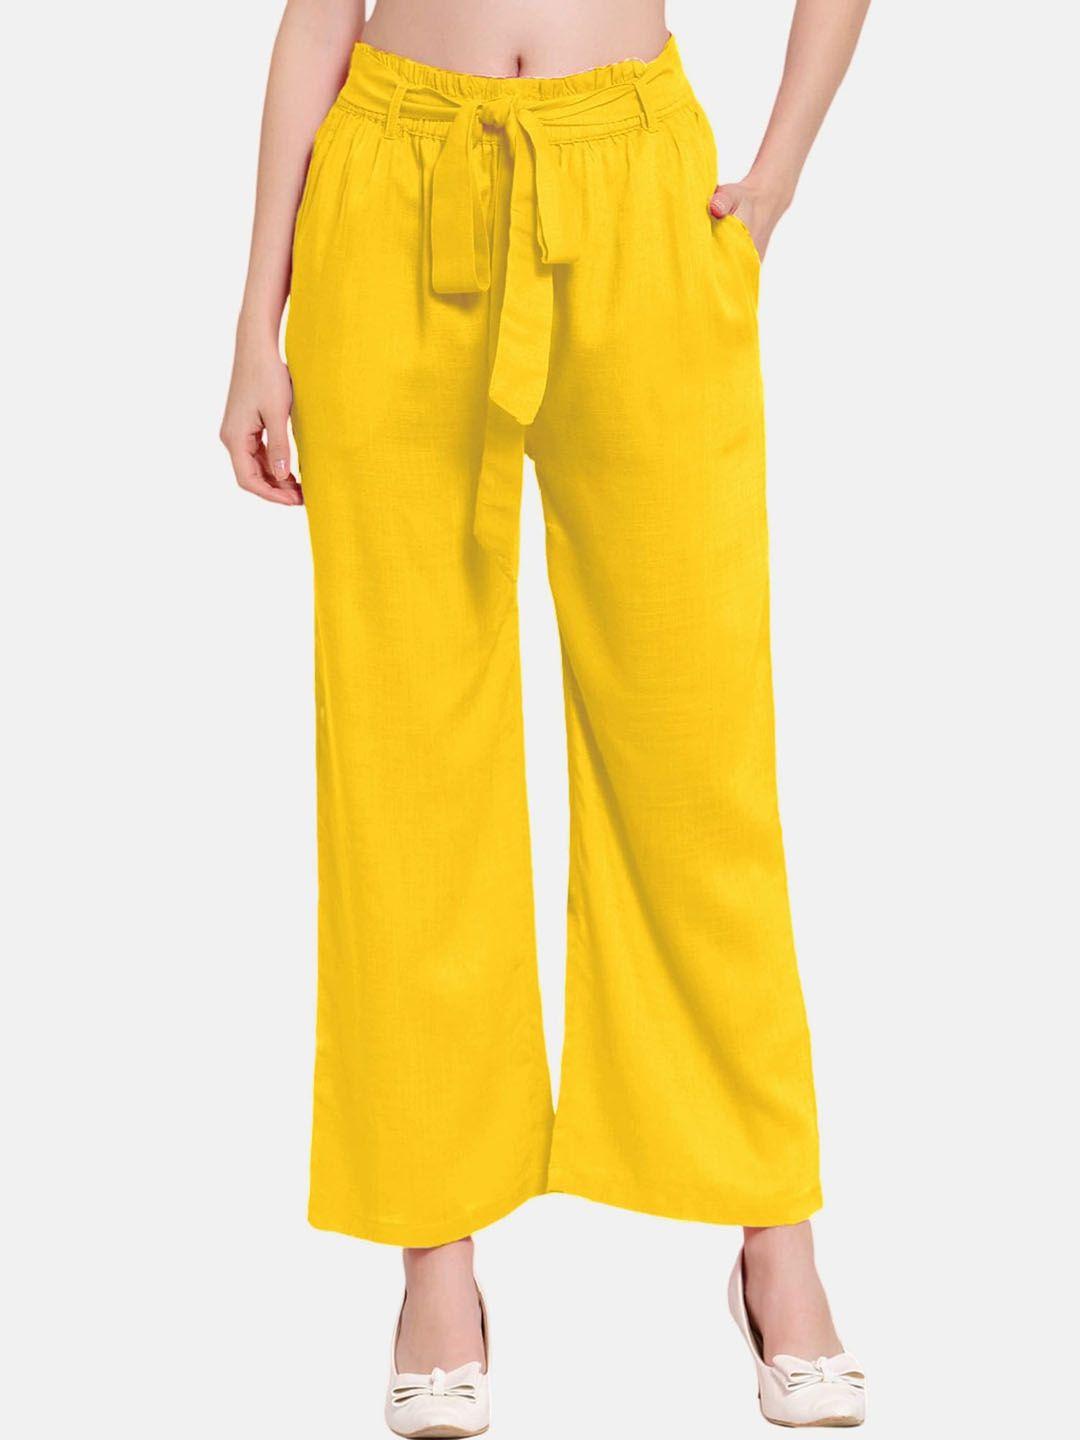 patrorna-women-yellow-smart-loose-fit-pleated-cotton-parallel-trousers